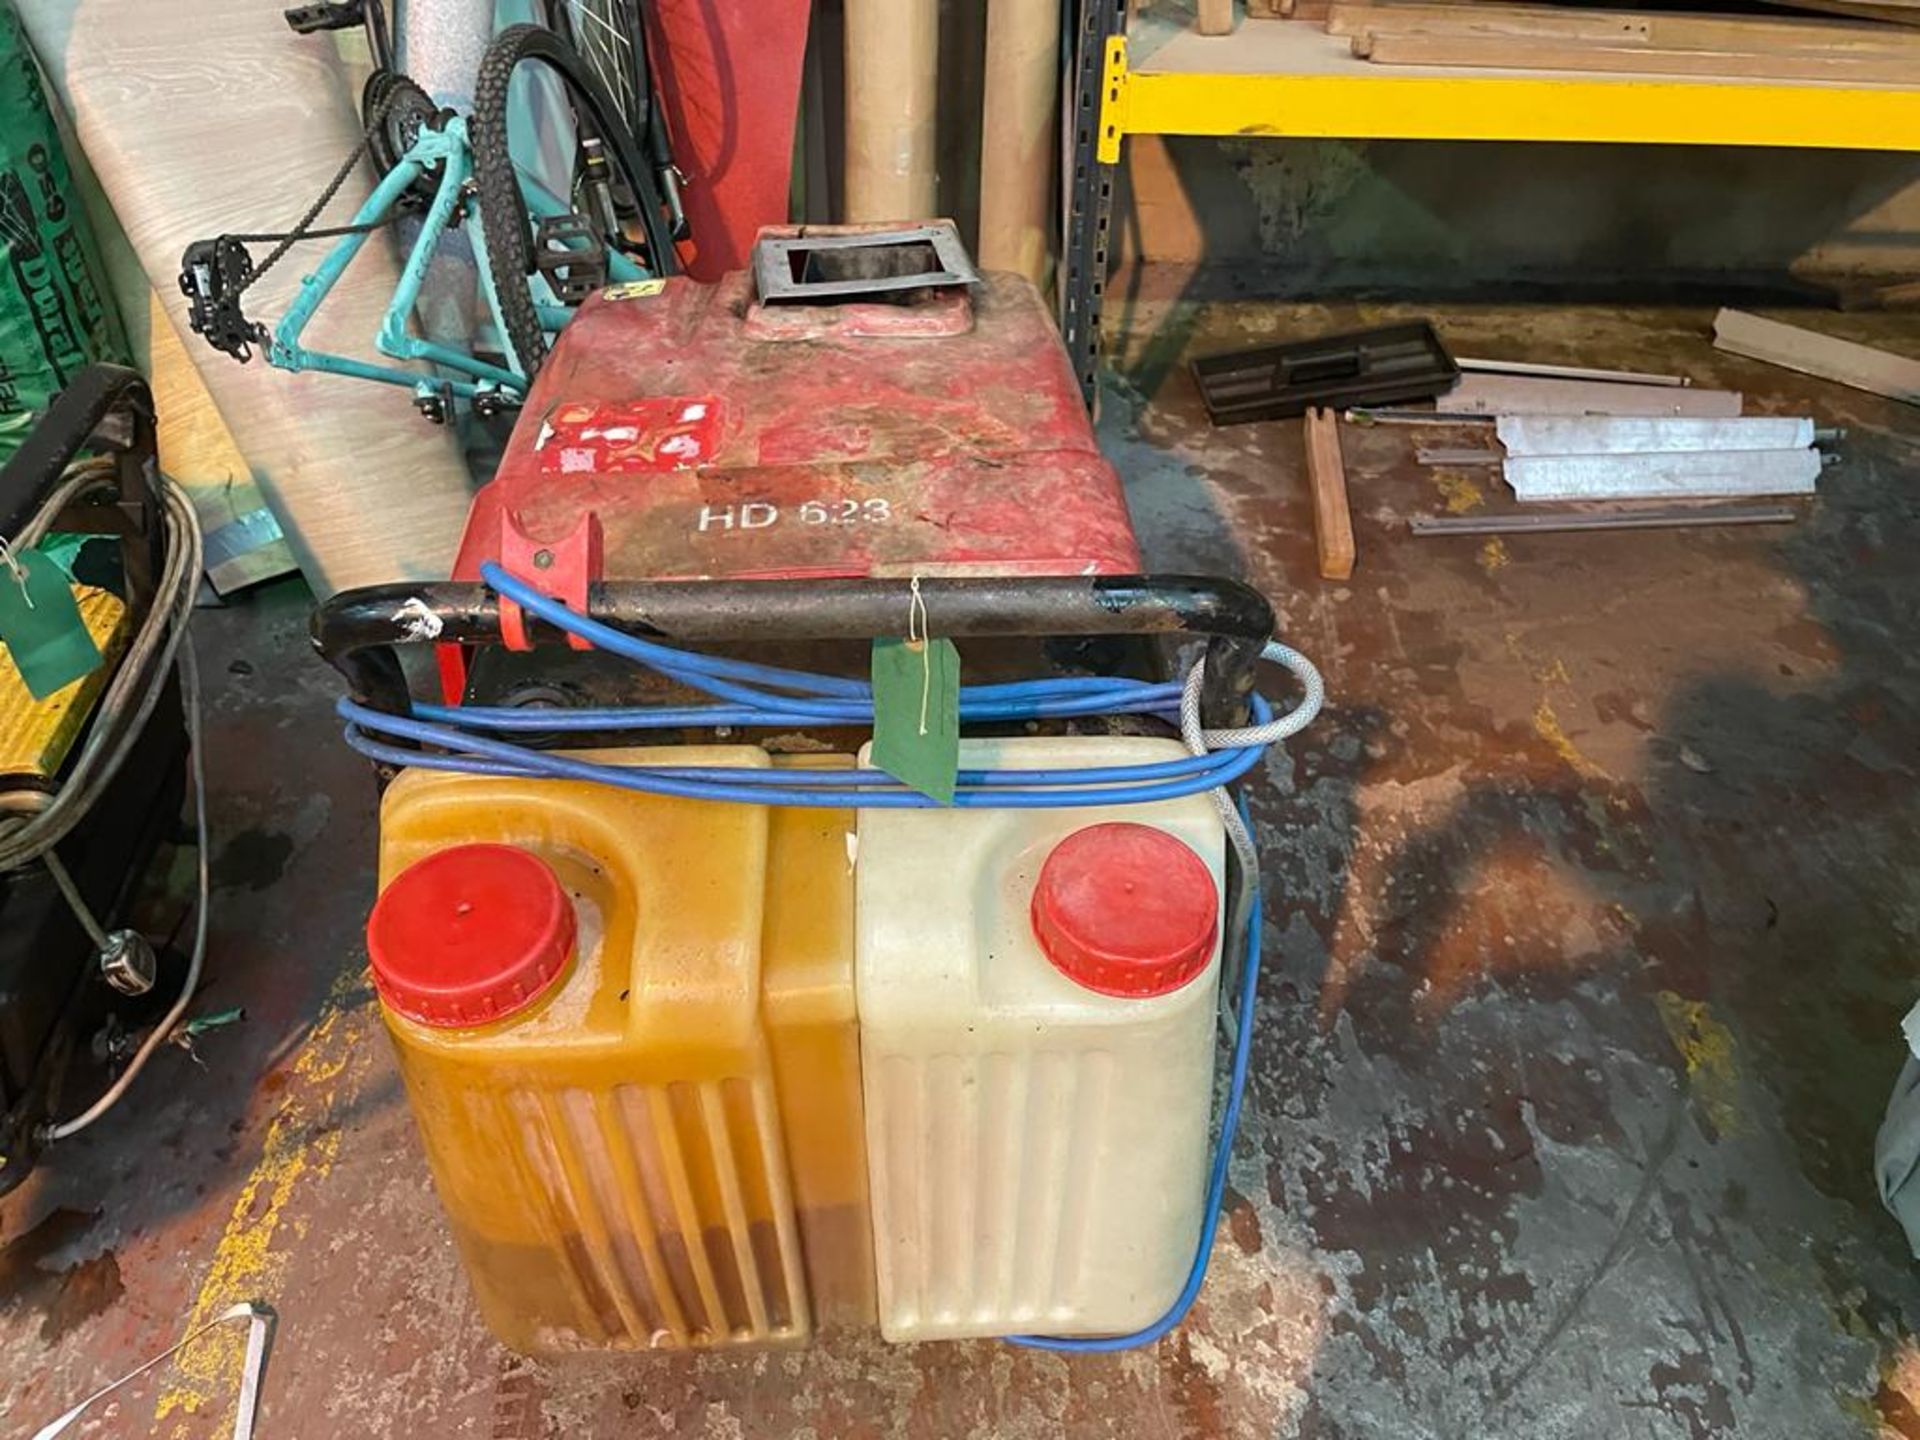 Eihrle pressure washer where it came from said it was fine but still SOLD AS SEEN